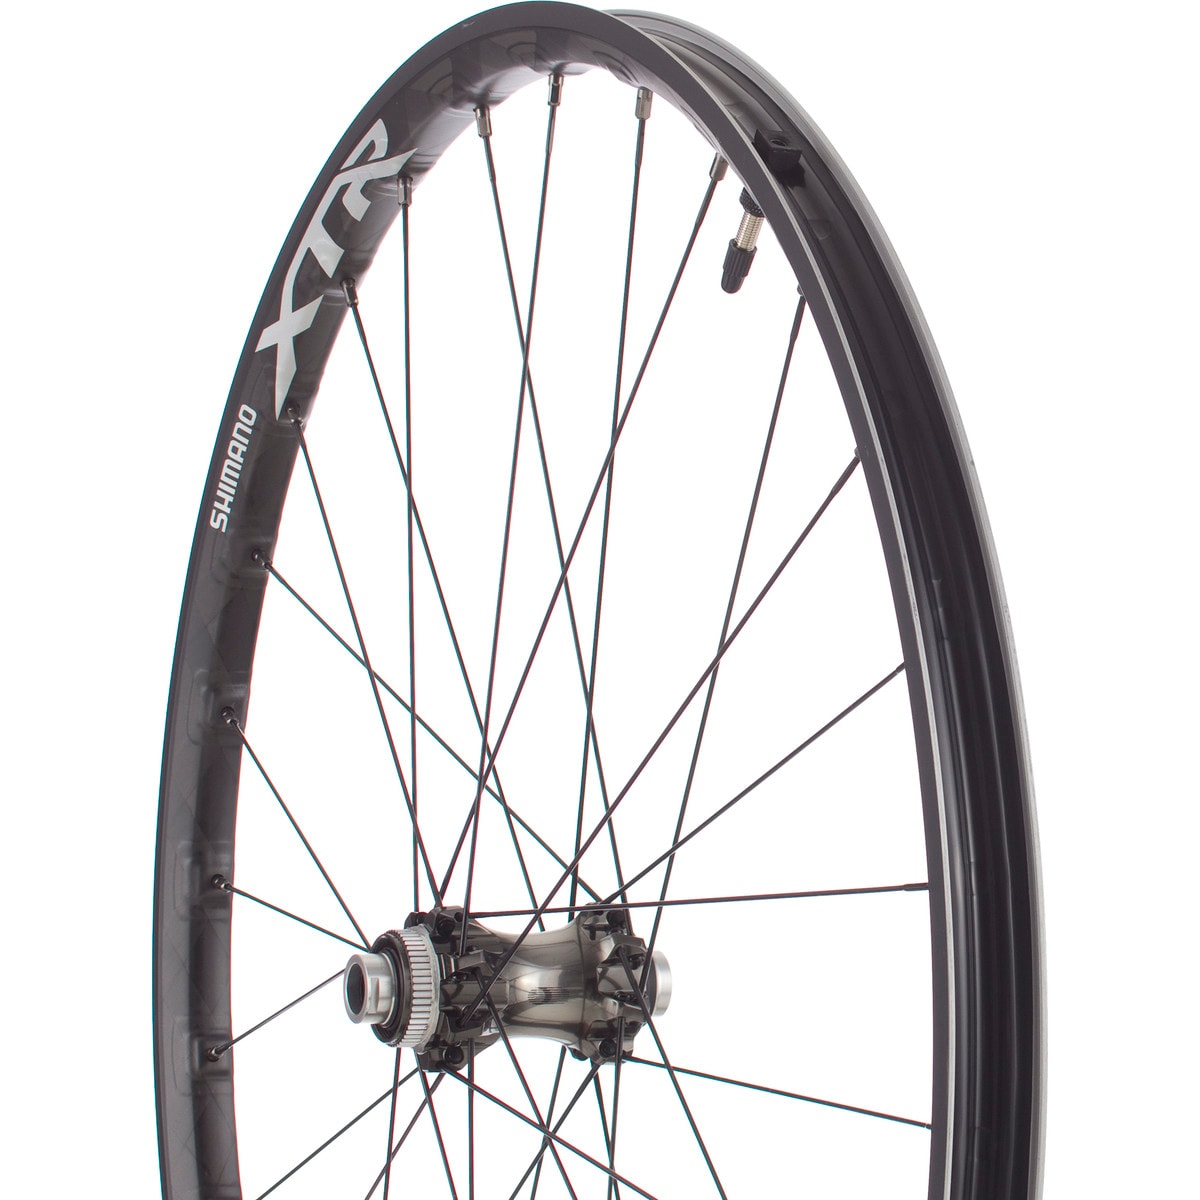 Shimano XTR WH M9020 TL 27.5in Wheelset